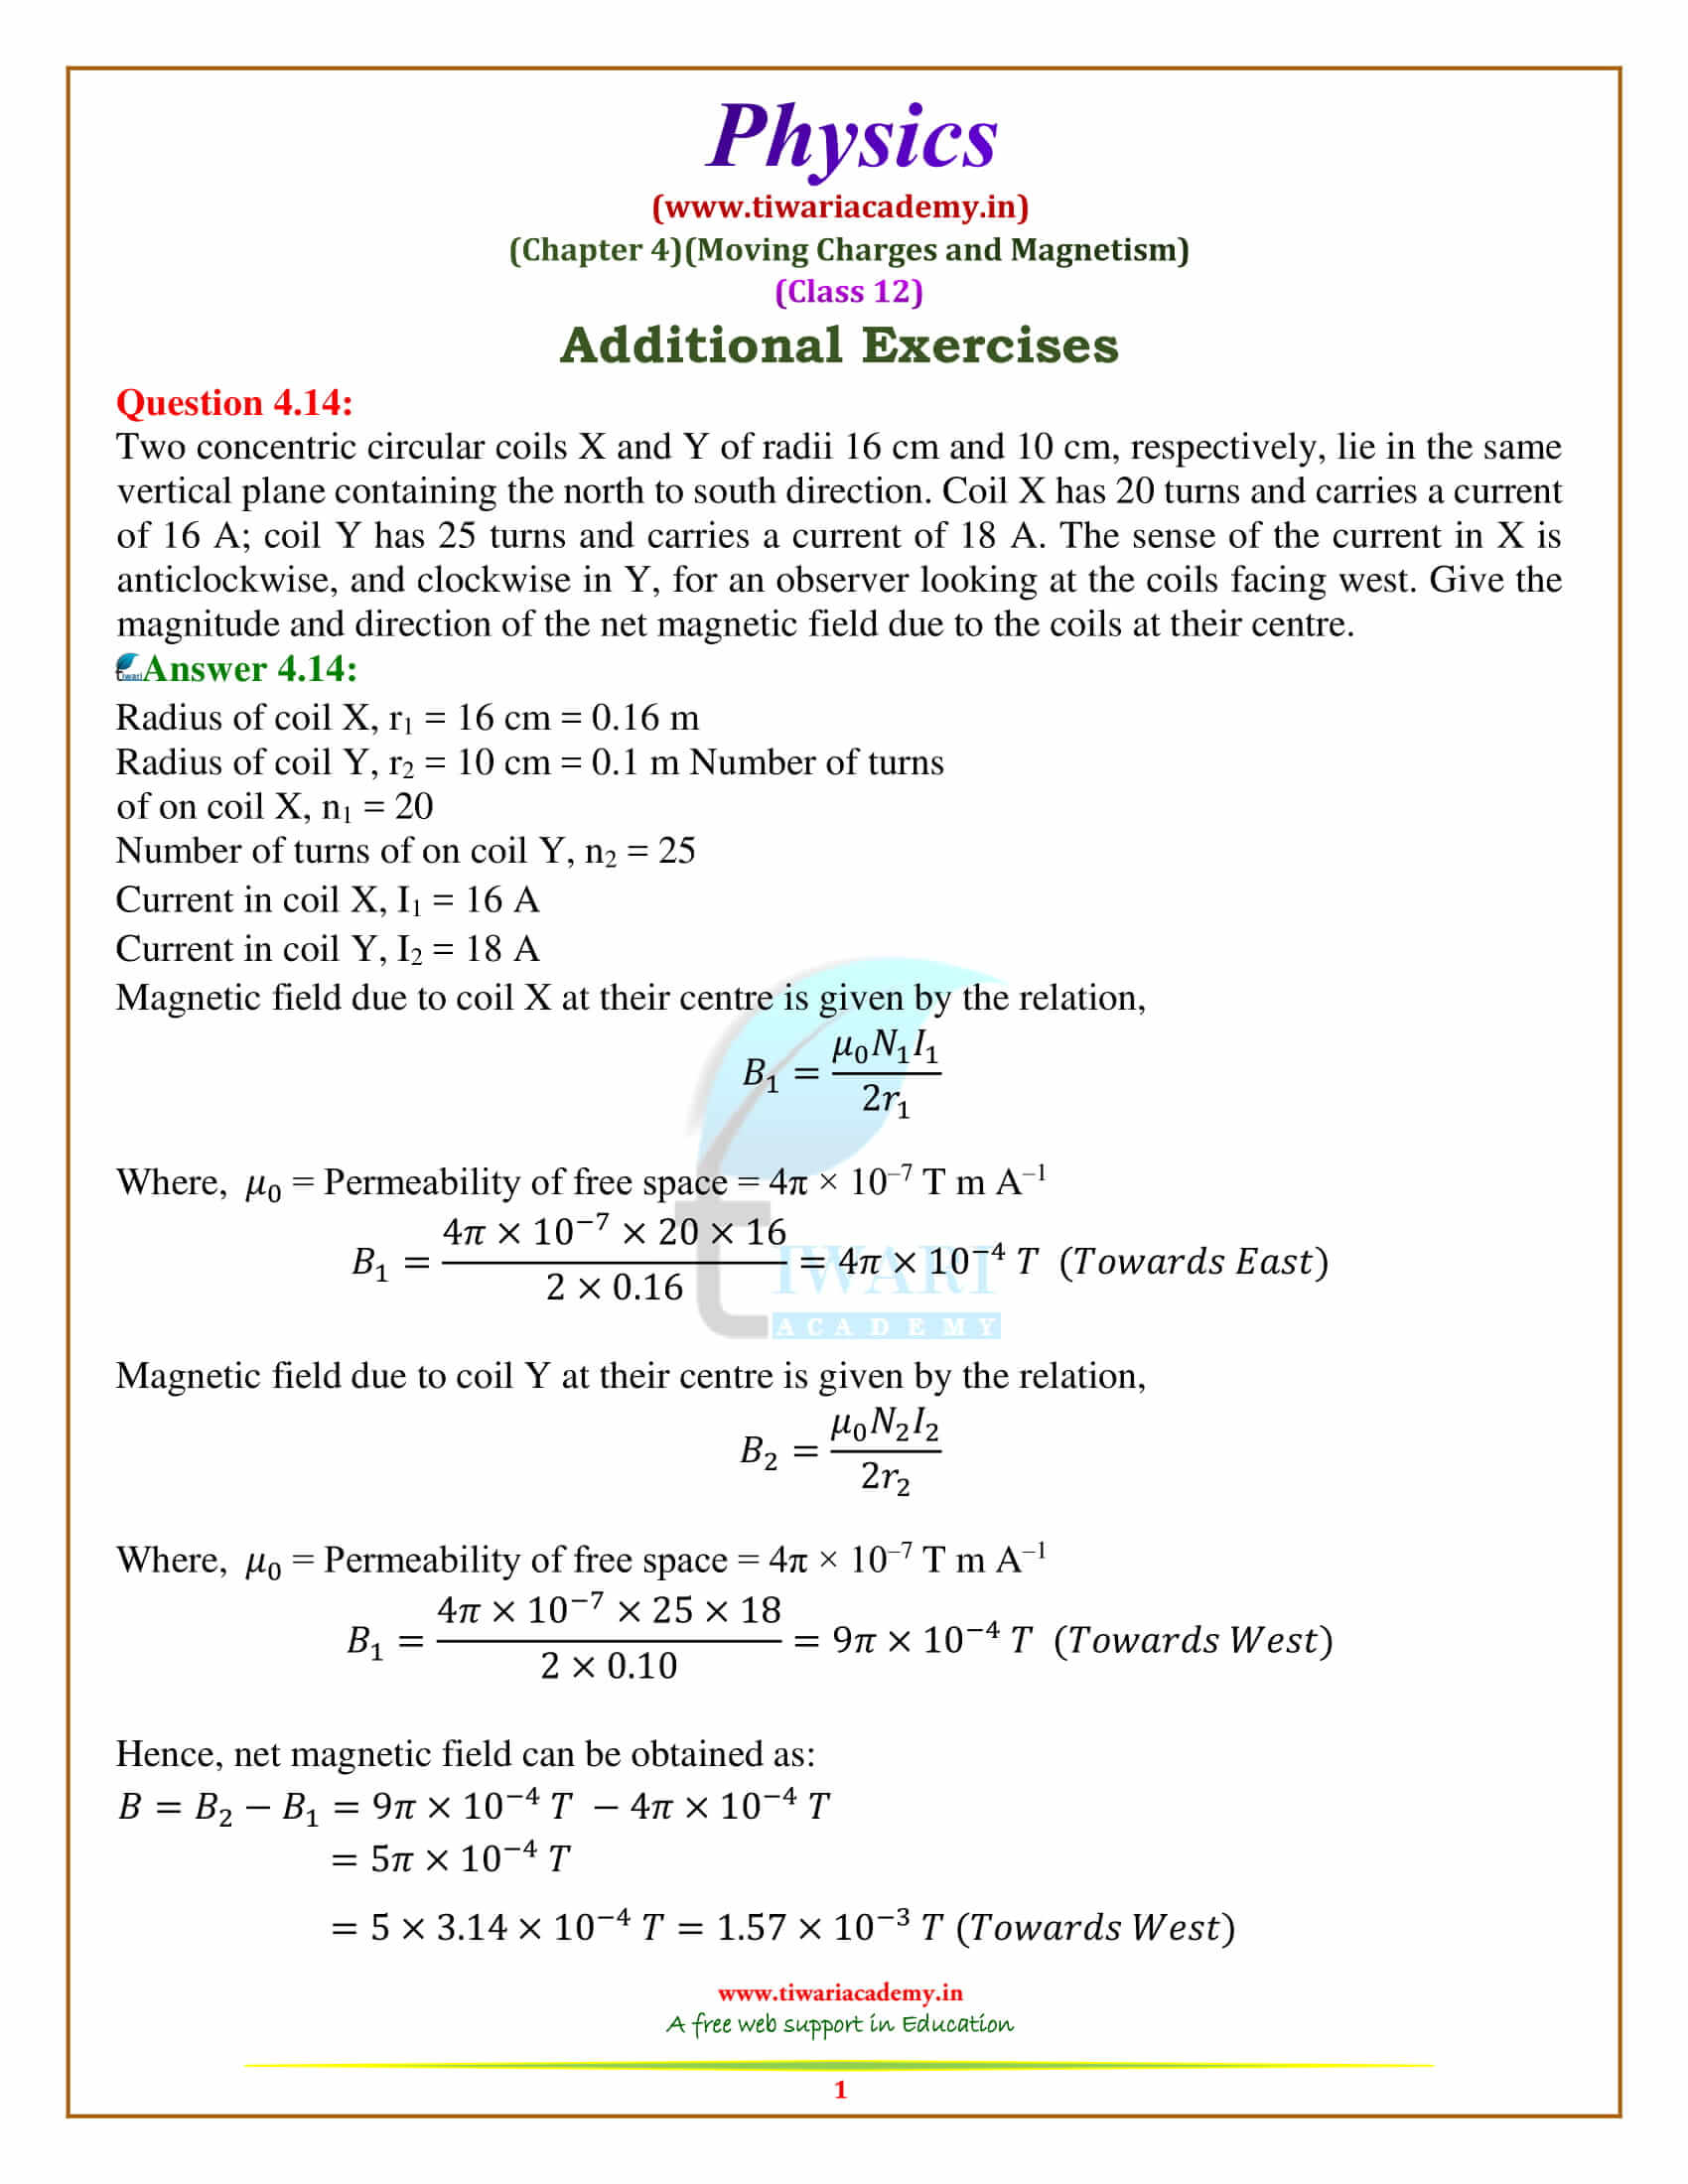 12 Physics Chapter 3 Moving Charges and Magnetism additional exercises